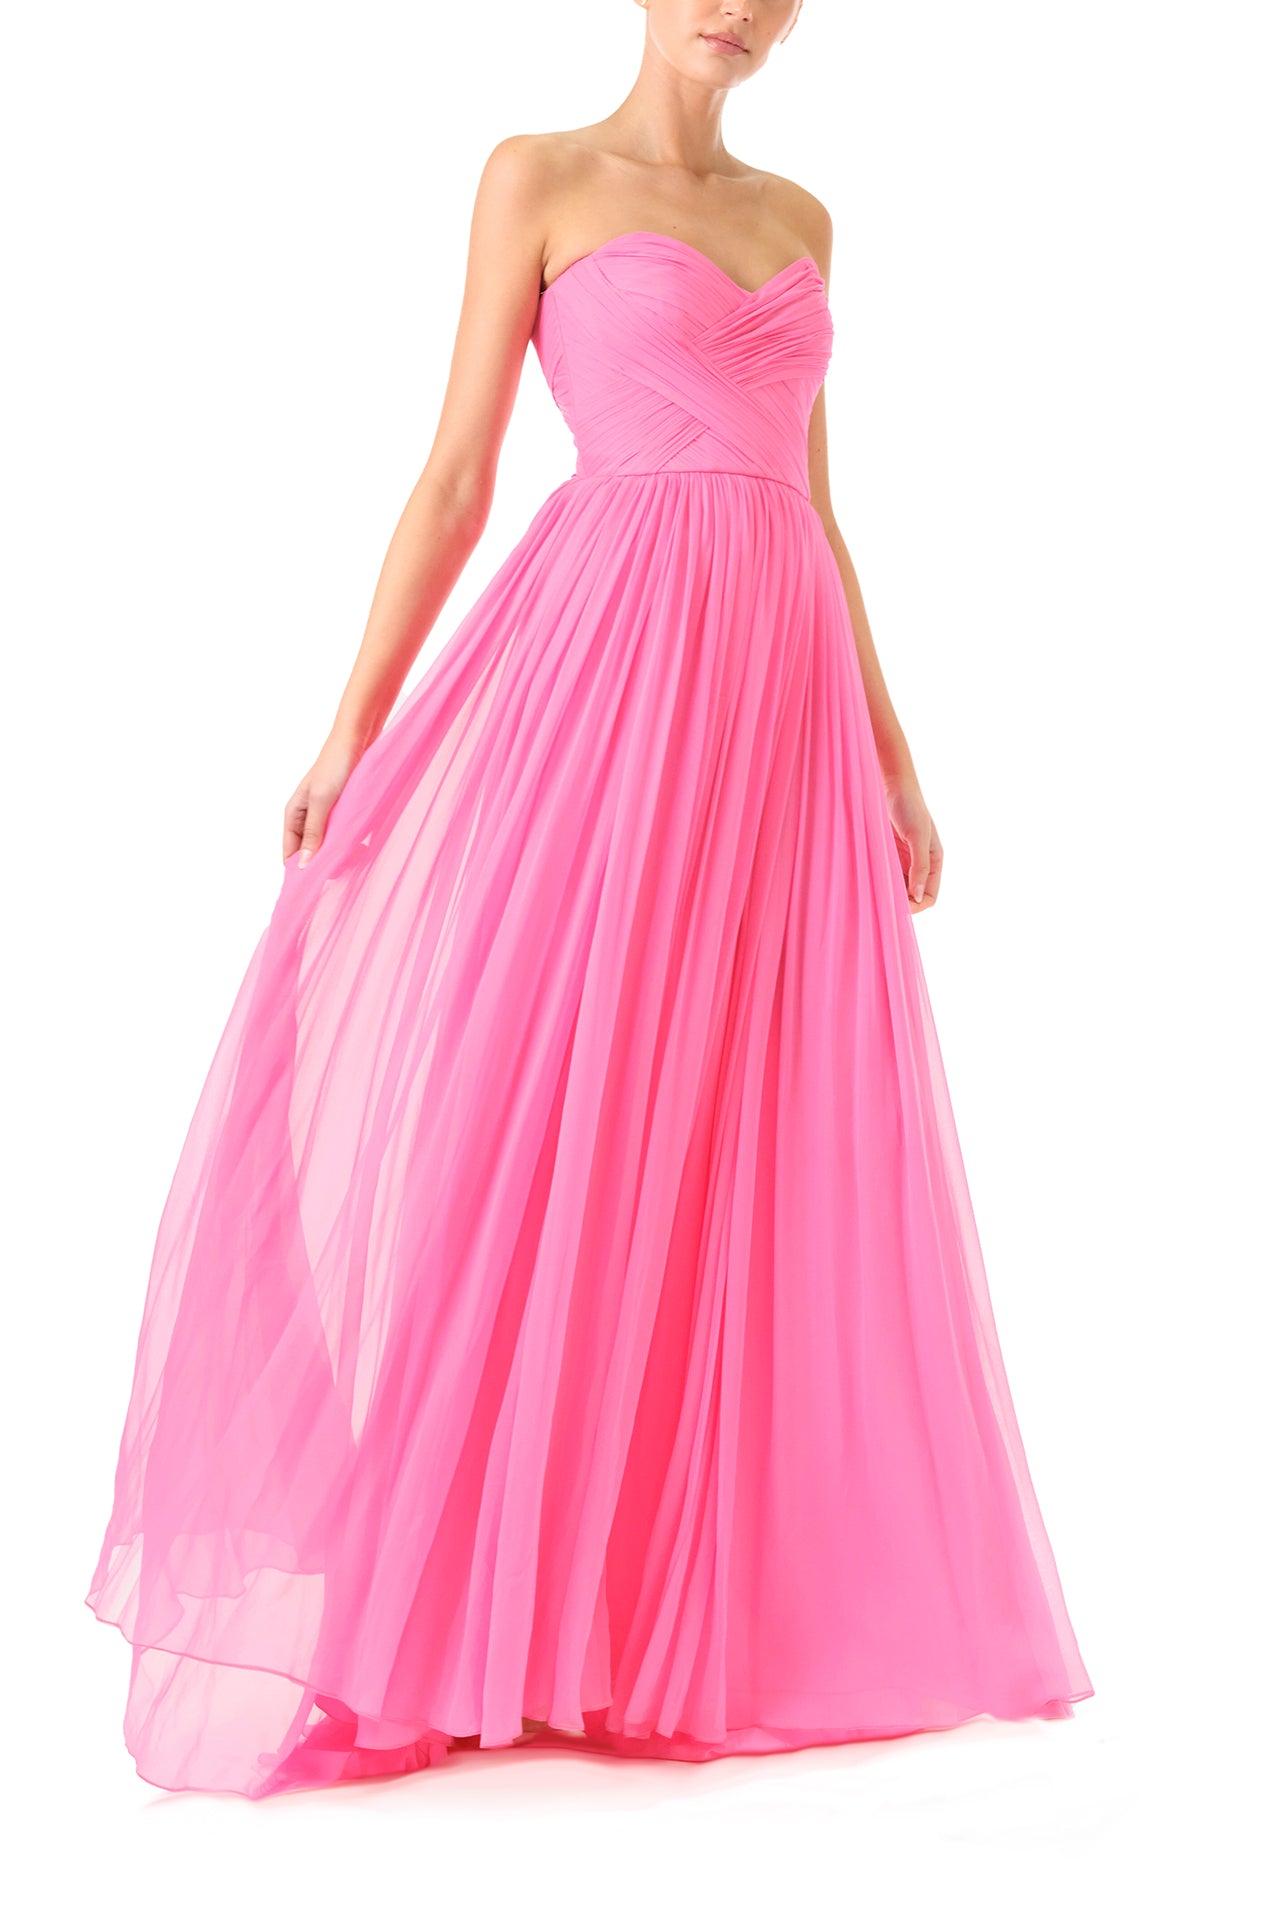 Monique Lhuillier Fall 2024 strapless pink chiffon gown with sweetheart neckline - fabric sheer.